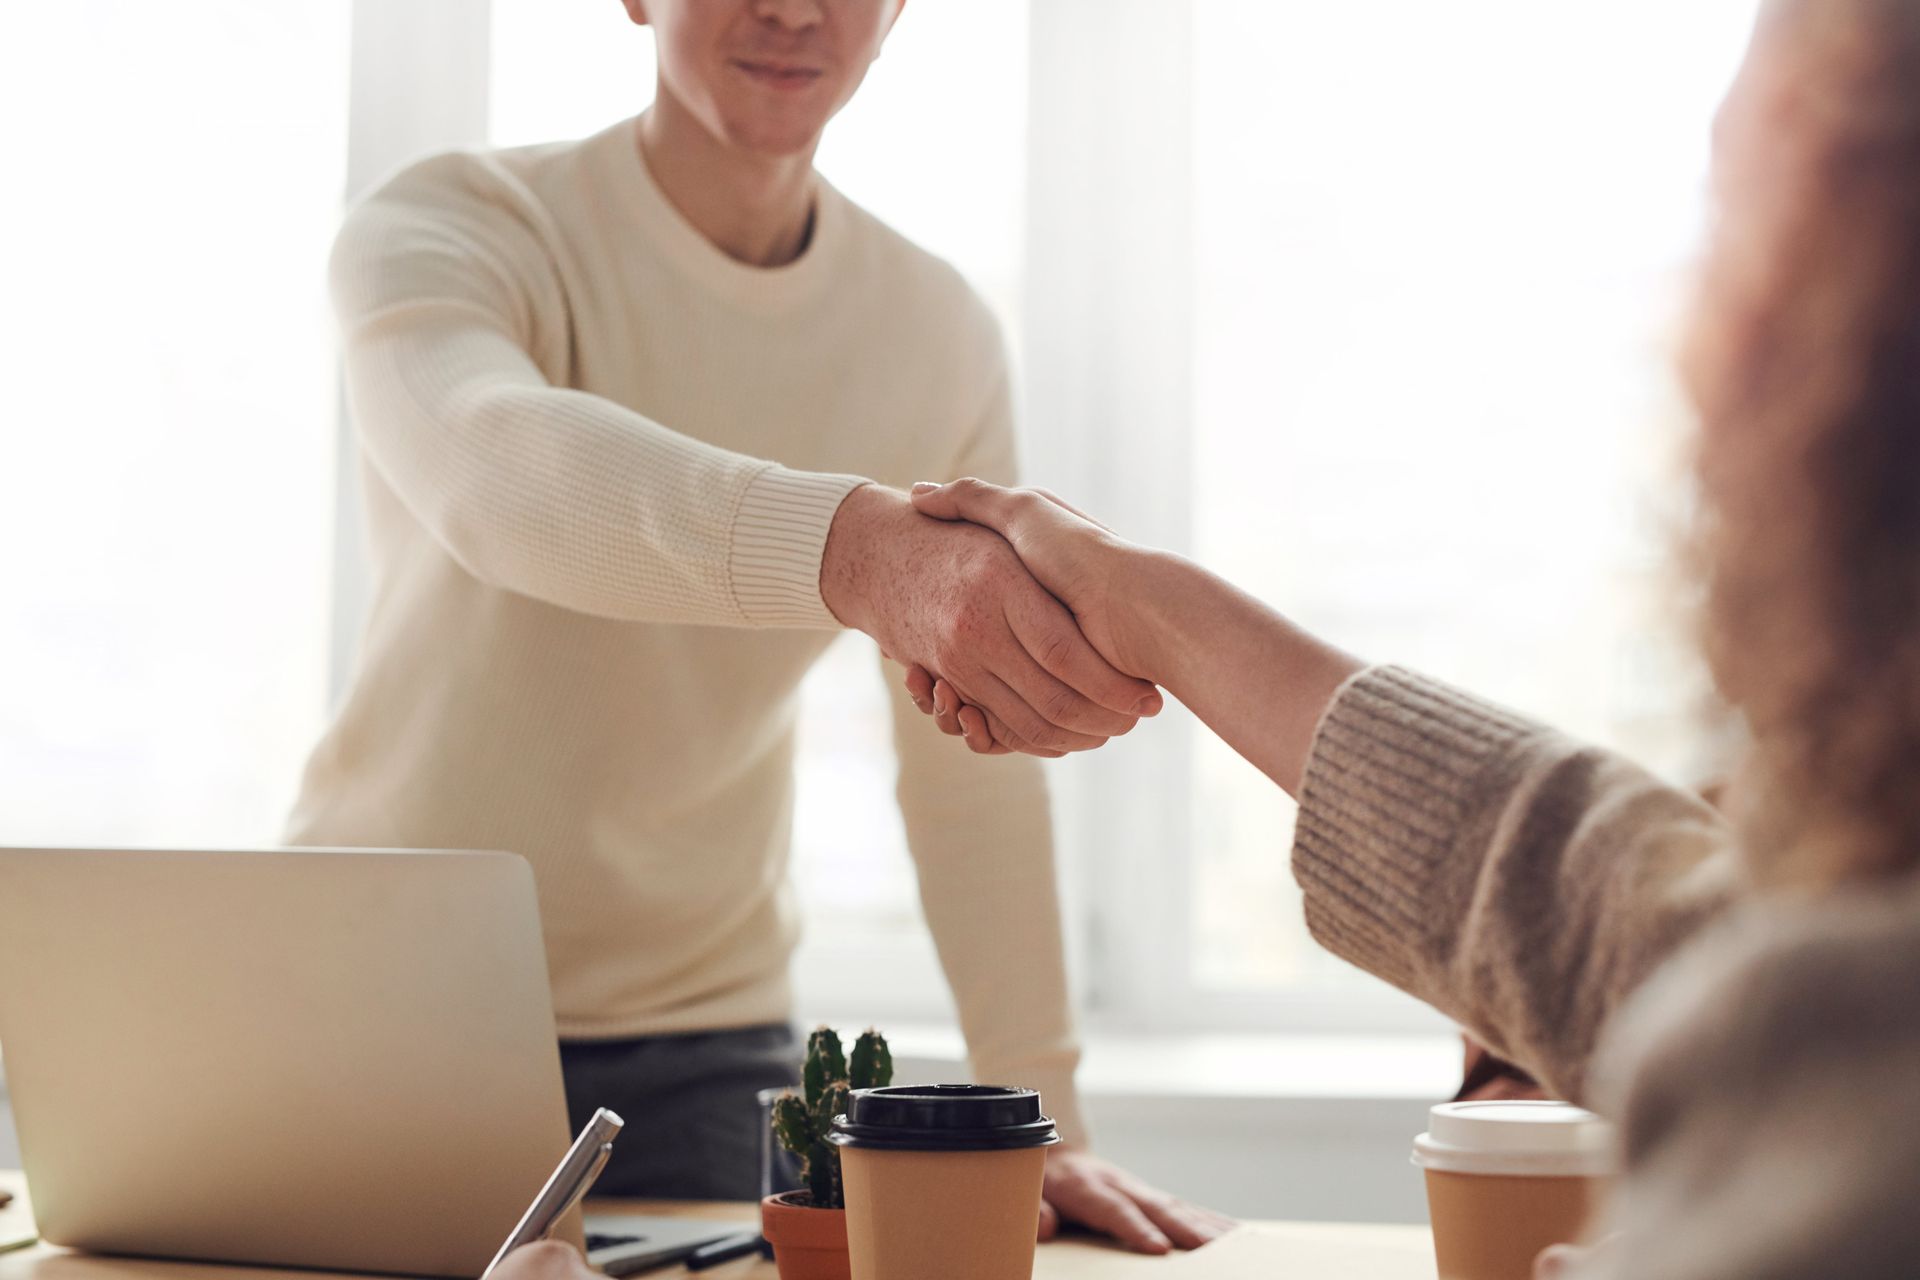 Two business persons shaking hands over a successful transaction.